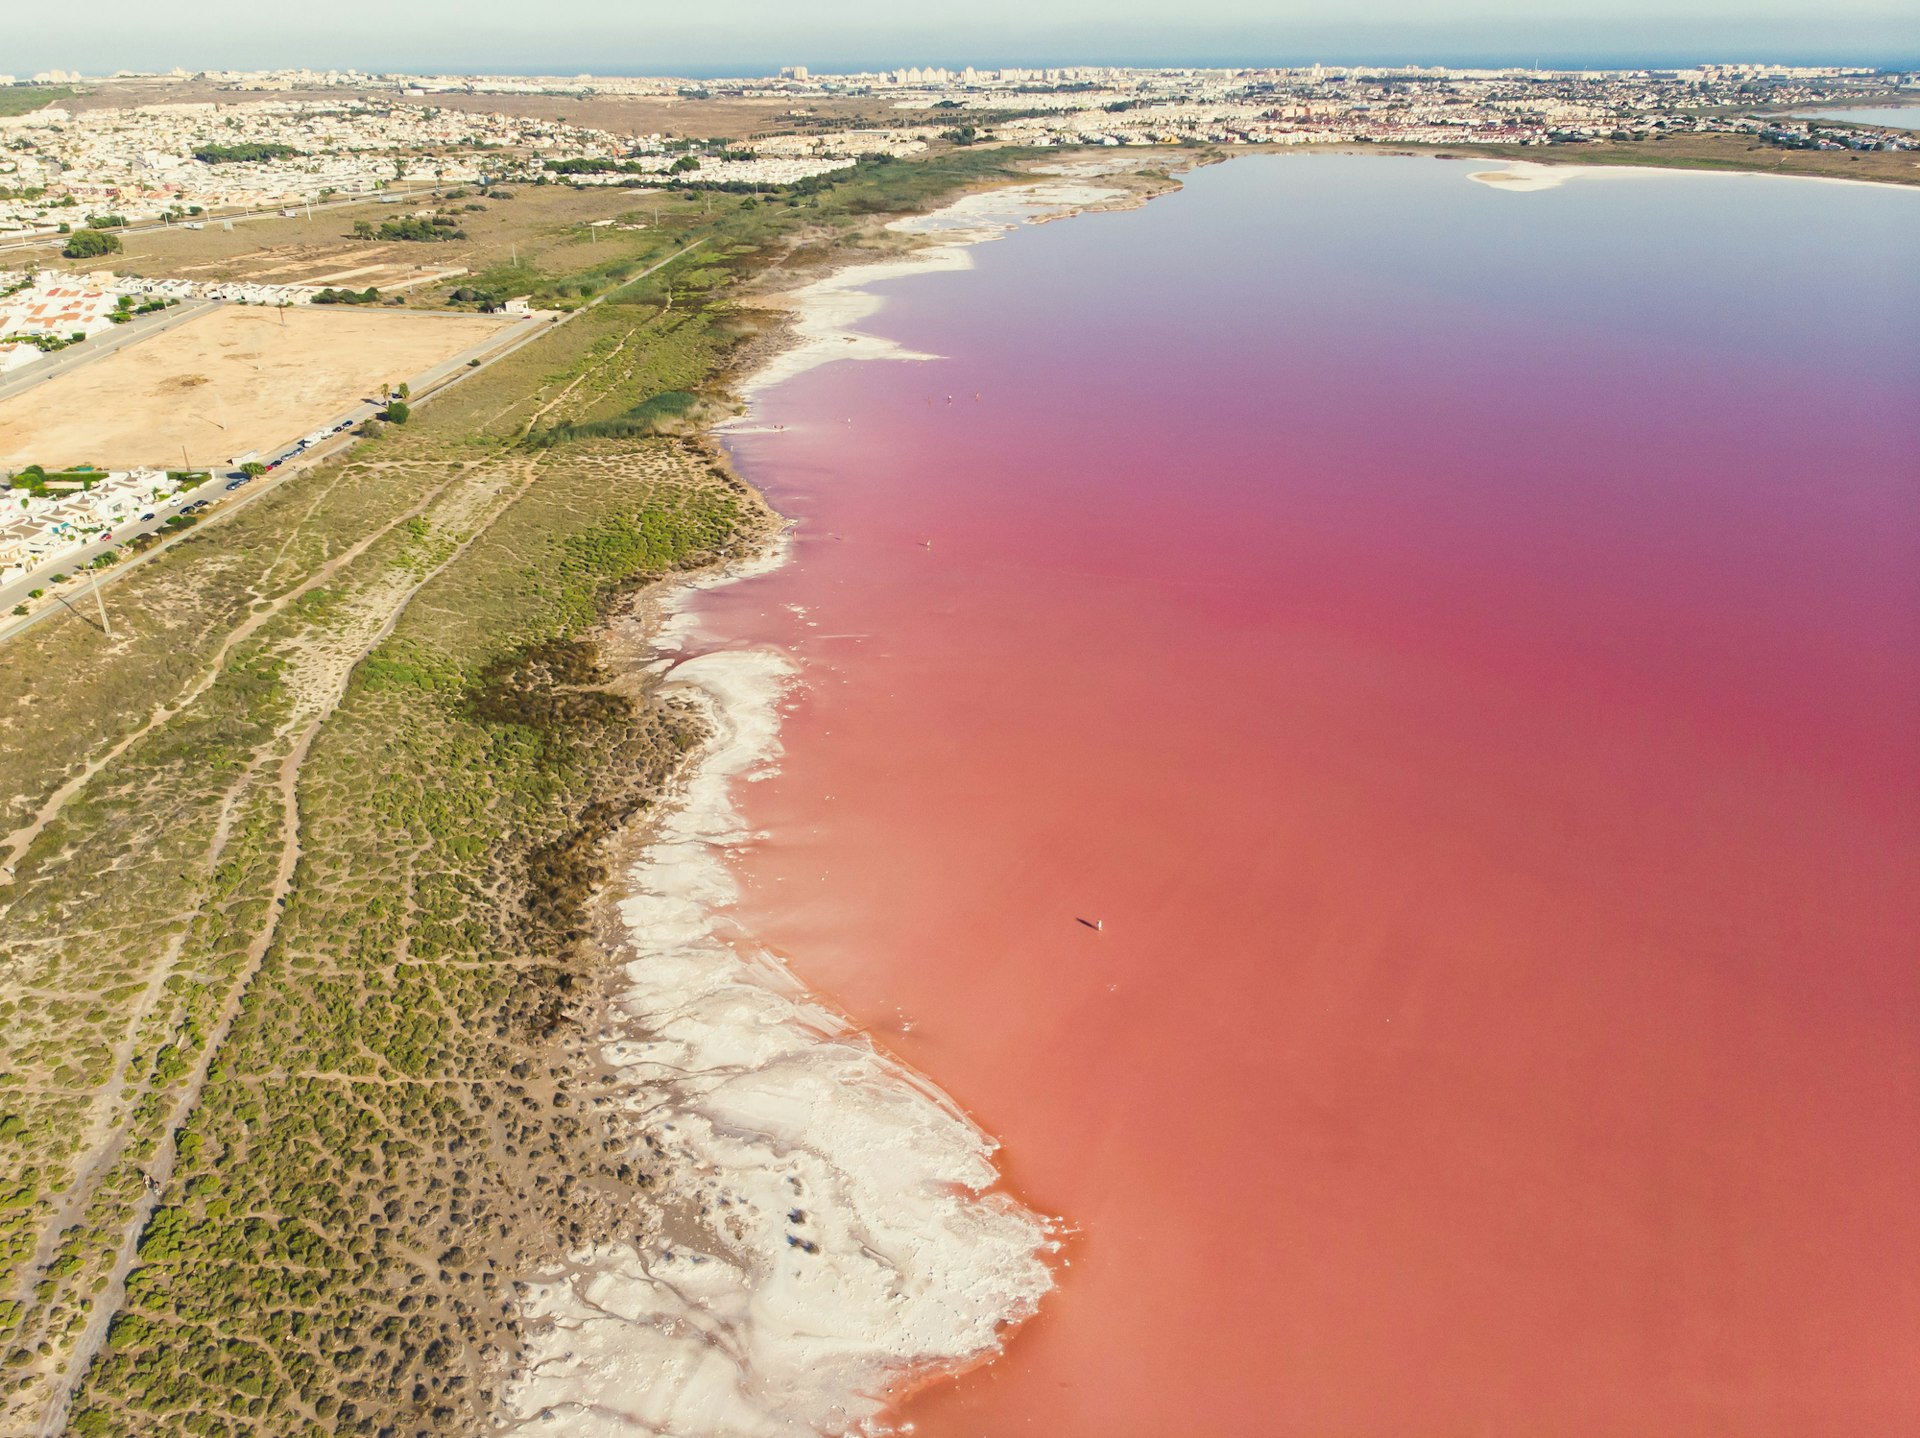 The shores of La Salinas de Torrevieja, a pink salt lagoon in Spain, glow against the green and beige coast